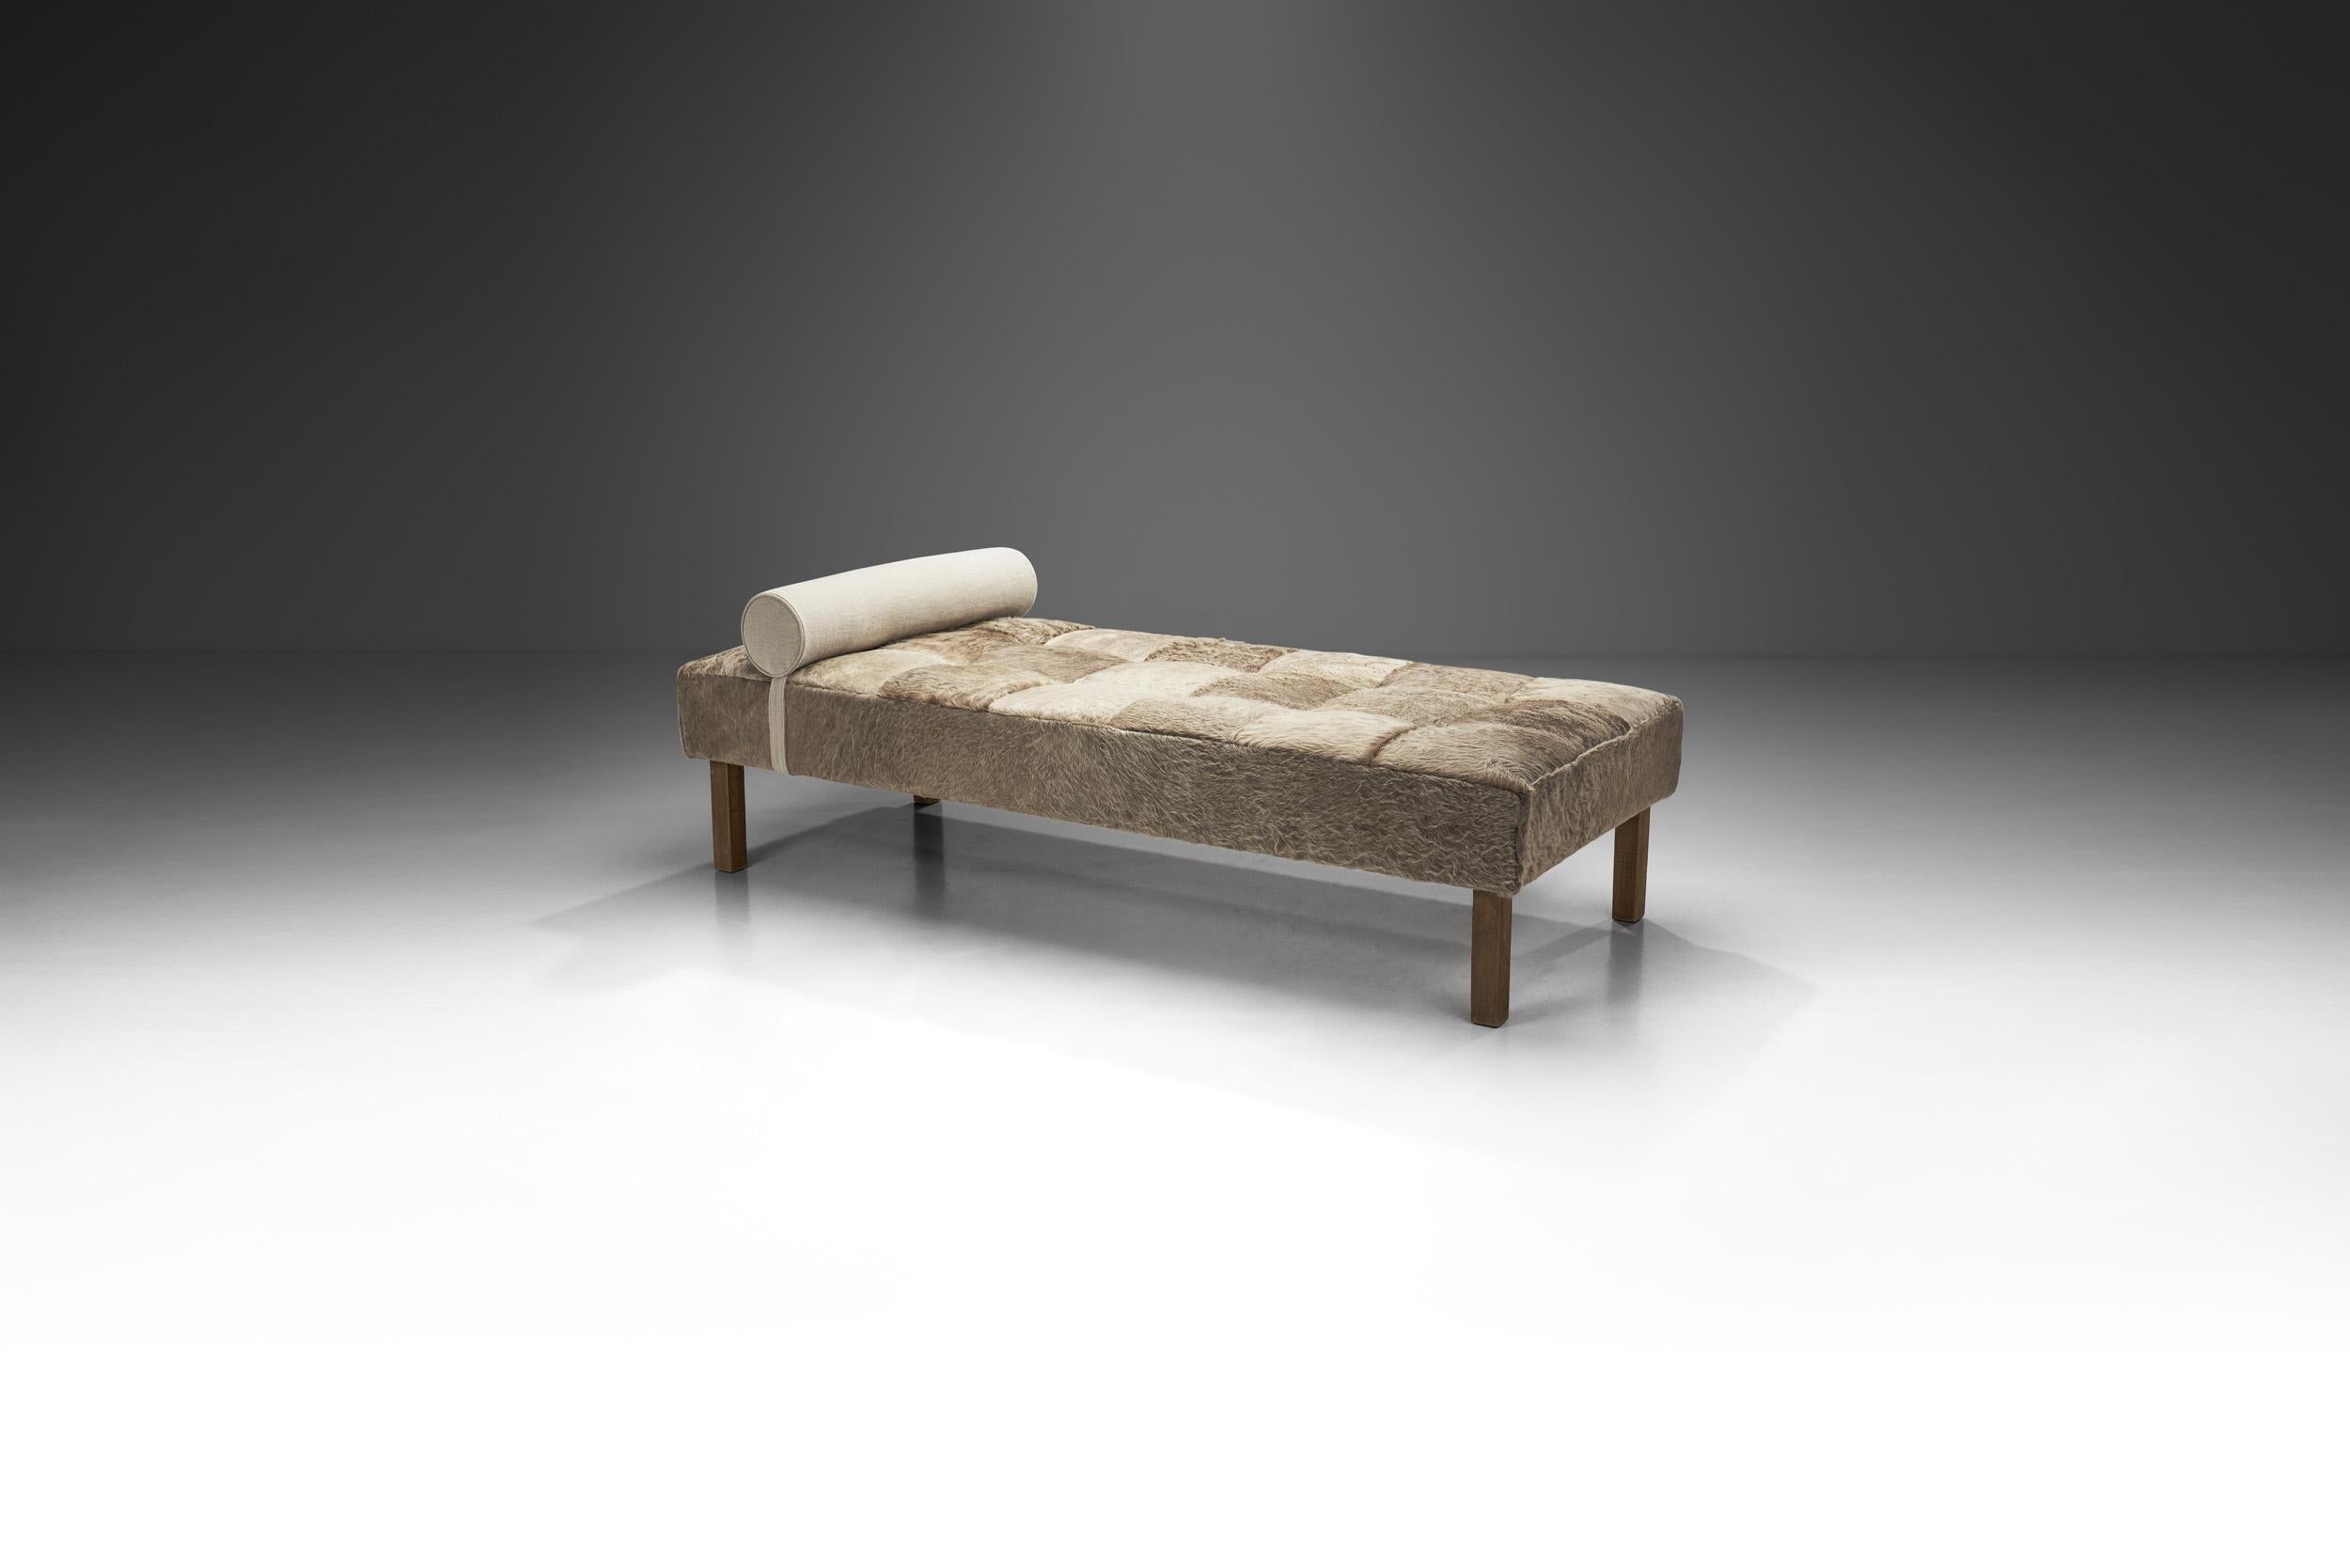 This gorgeous daybed was inspired by classic mid-century European furniture design and simplicity. Pieces from the mid-century era, like this daybed, are characterized by clarity in design and extremely high-quality craftsmanship and choice of